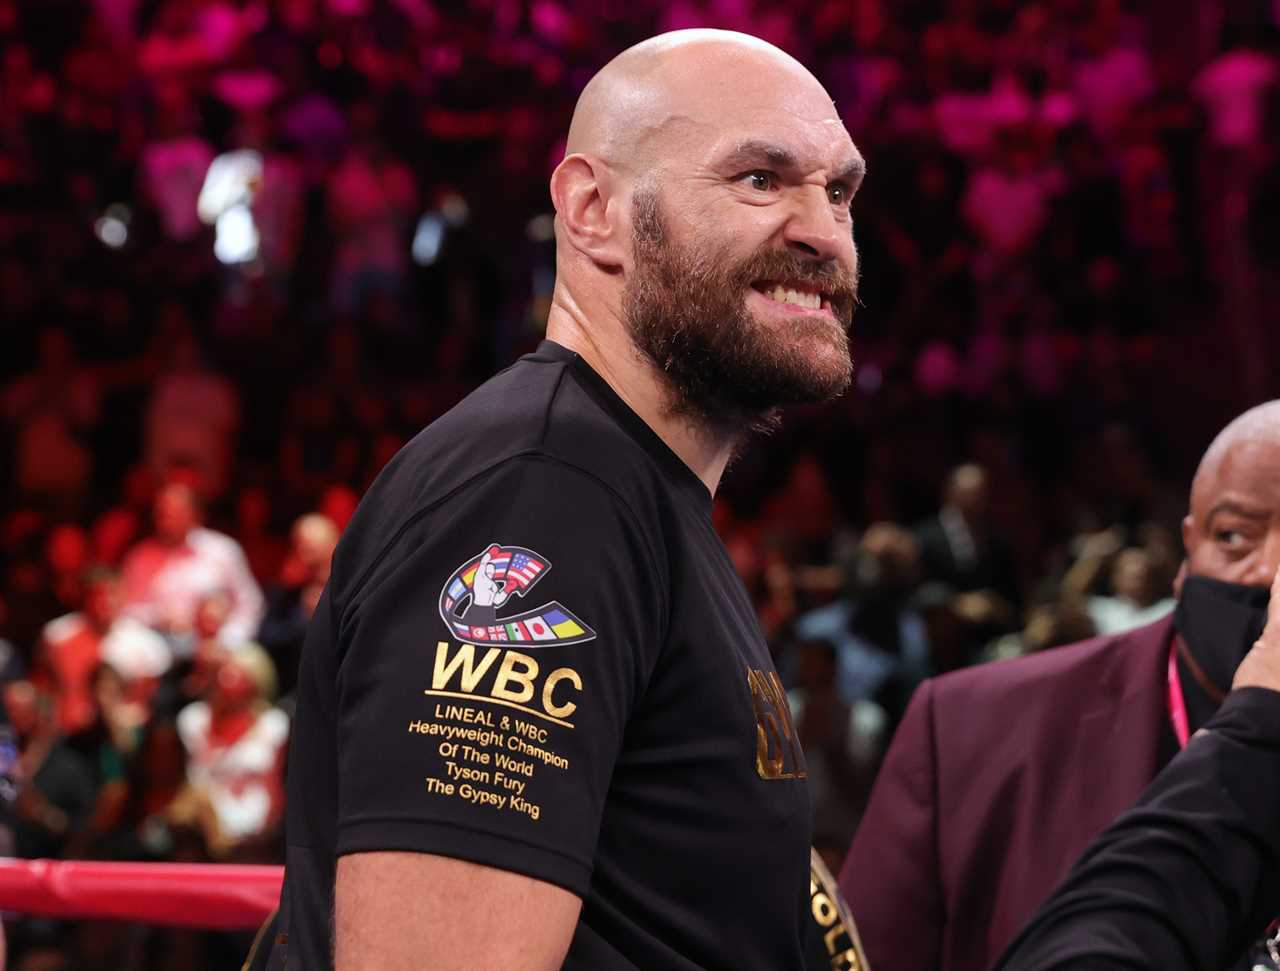 Dillian Whyte snubbed Tyson Fury with no-show before Wembley showdown. David Haye, ex-heavyweight champion, thinks Dillian Whyte